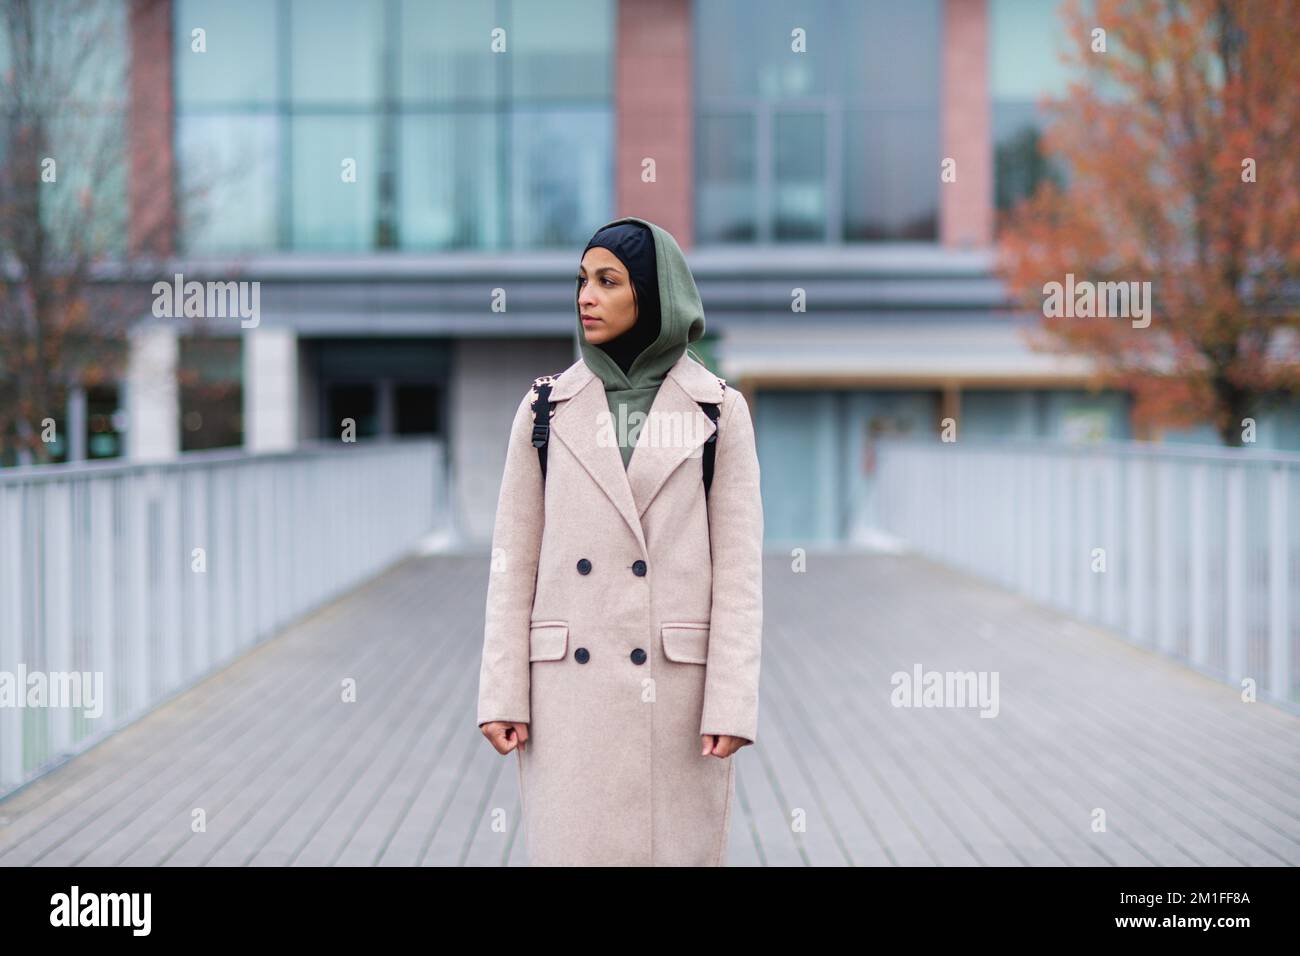 Young multiracial woman standing in a city bridge. Stock Photo